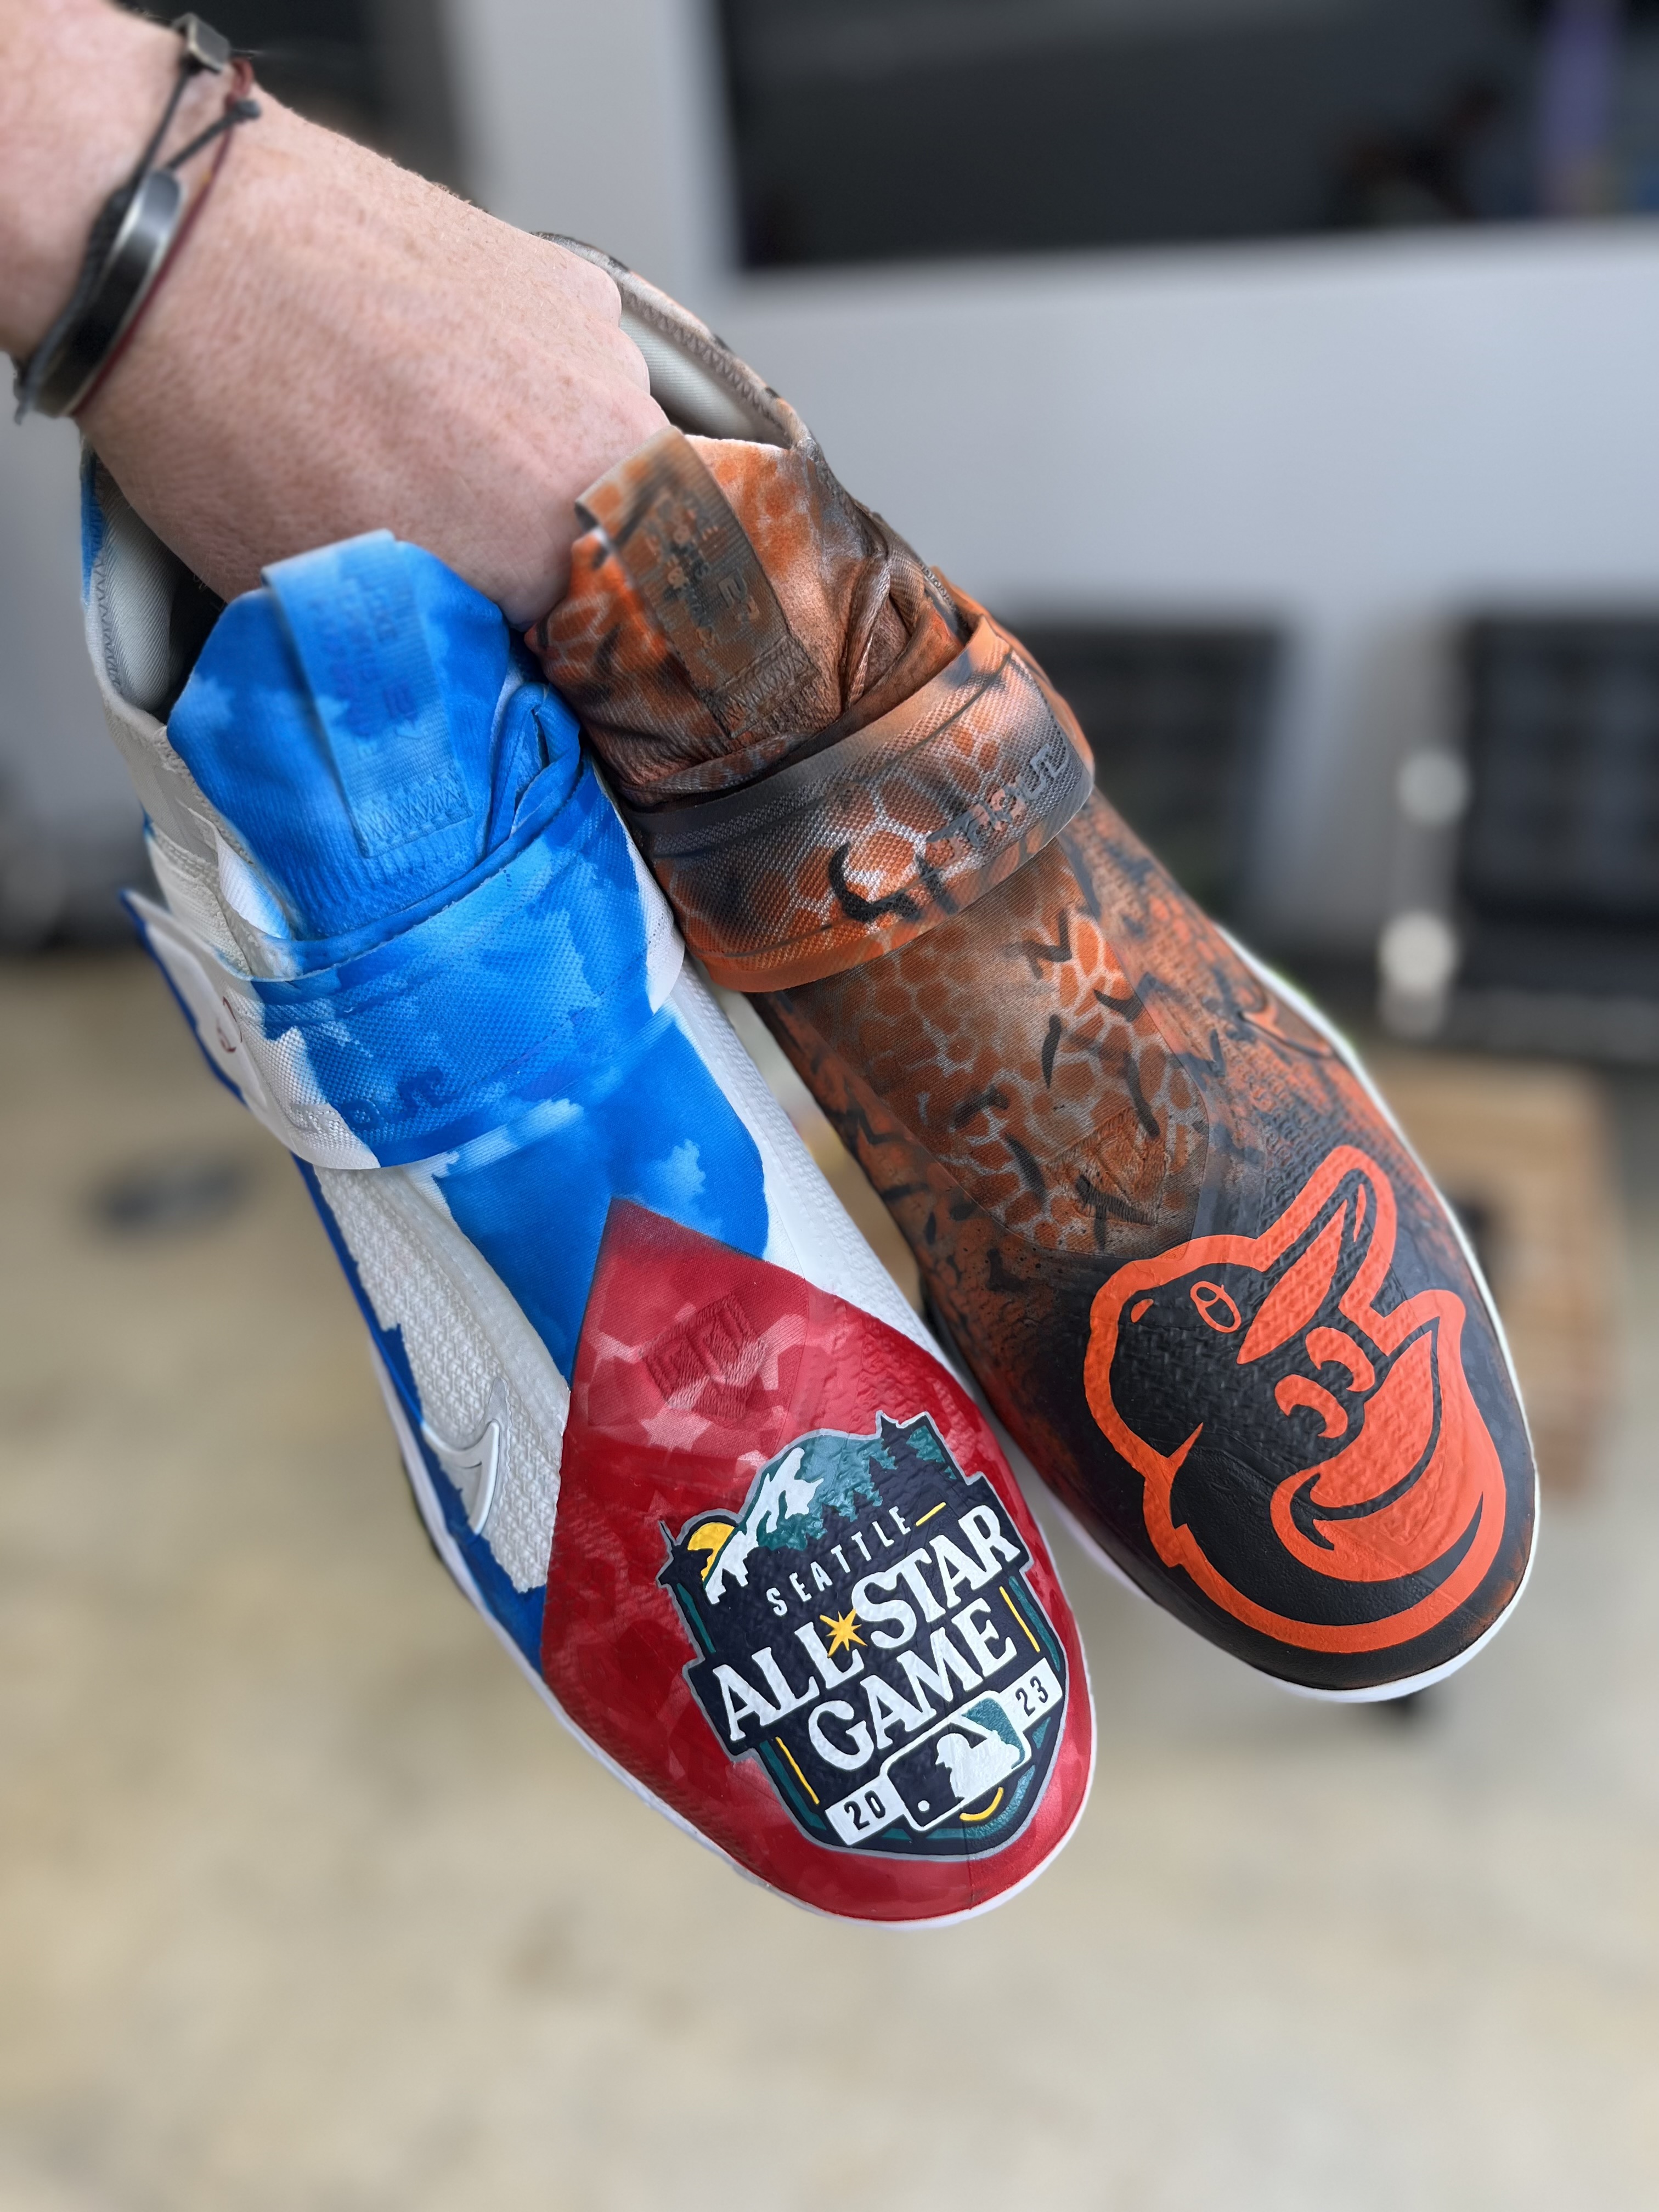 Bautista's ASG cleats and custom glove are ADORABLE! : r/orioles